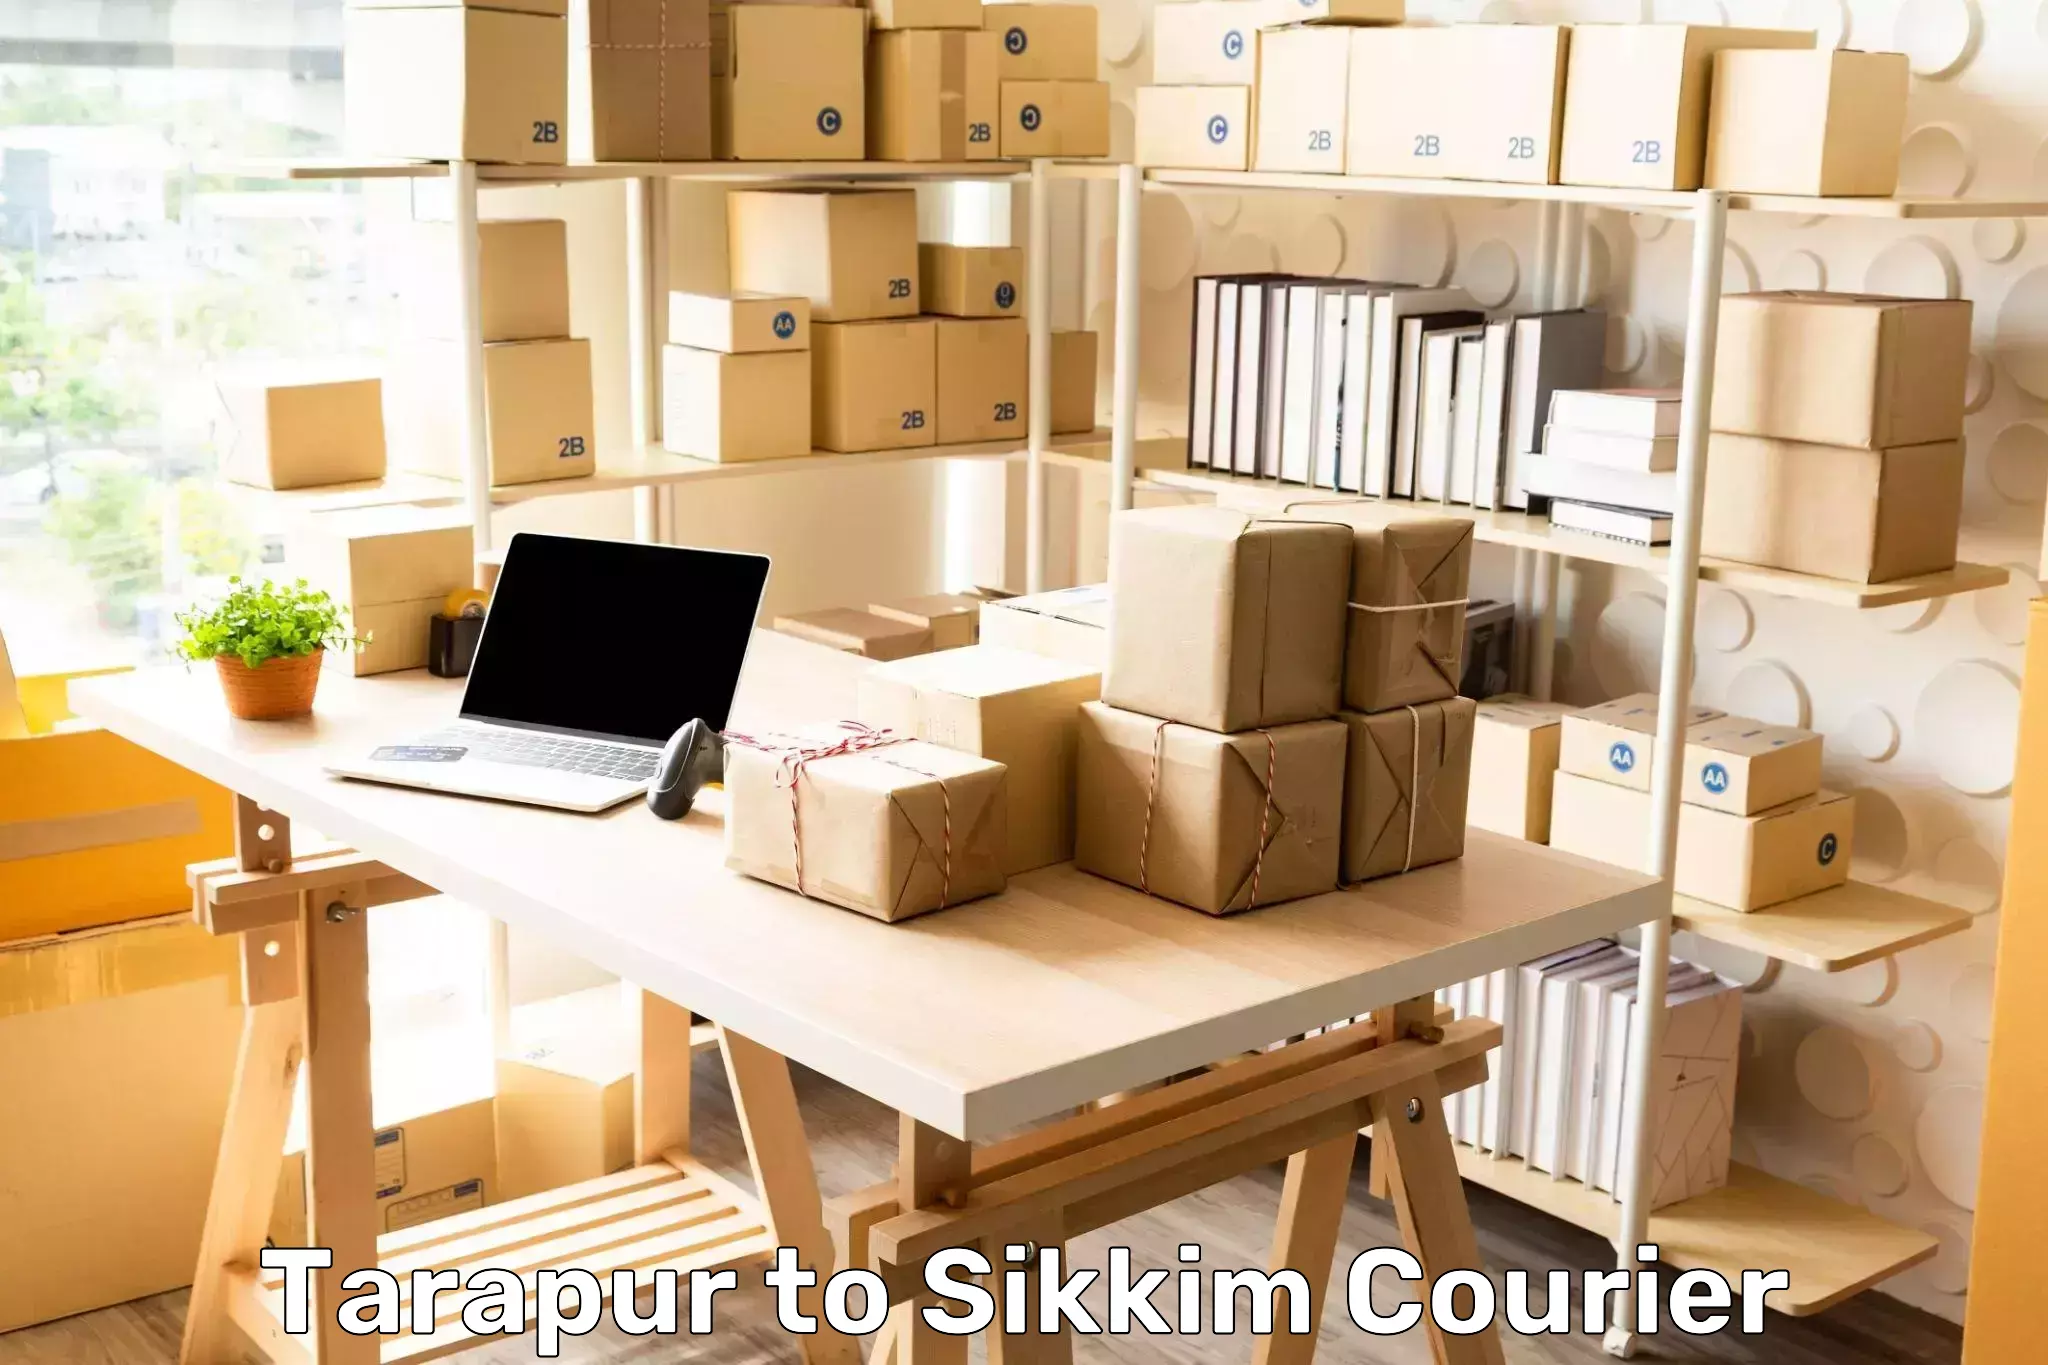 Express package services Tarapur to Sikkim